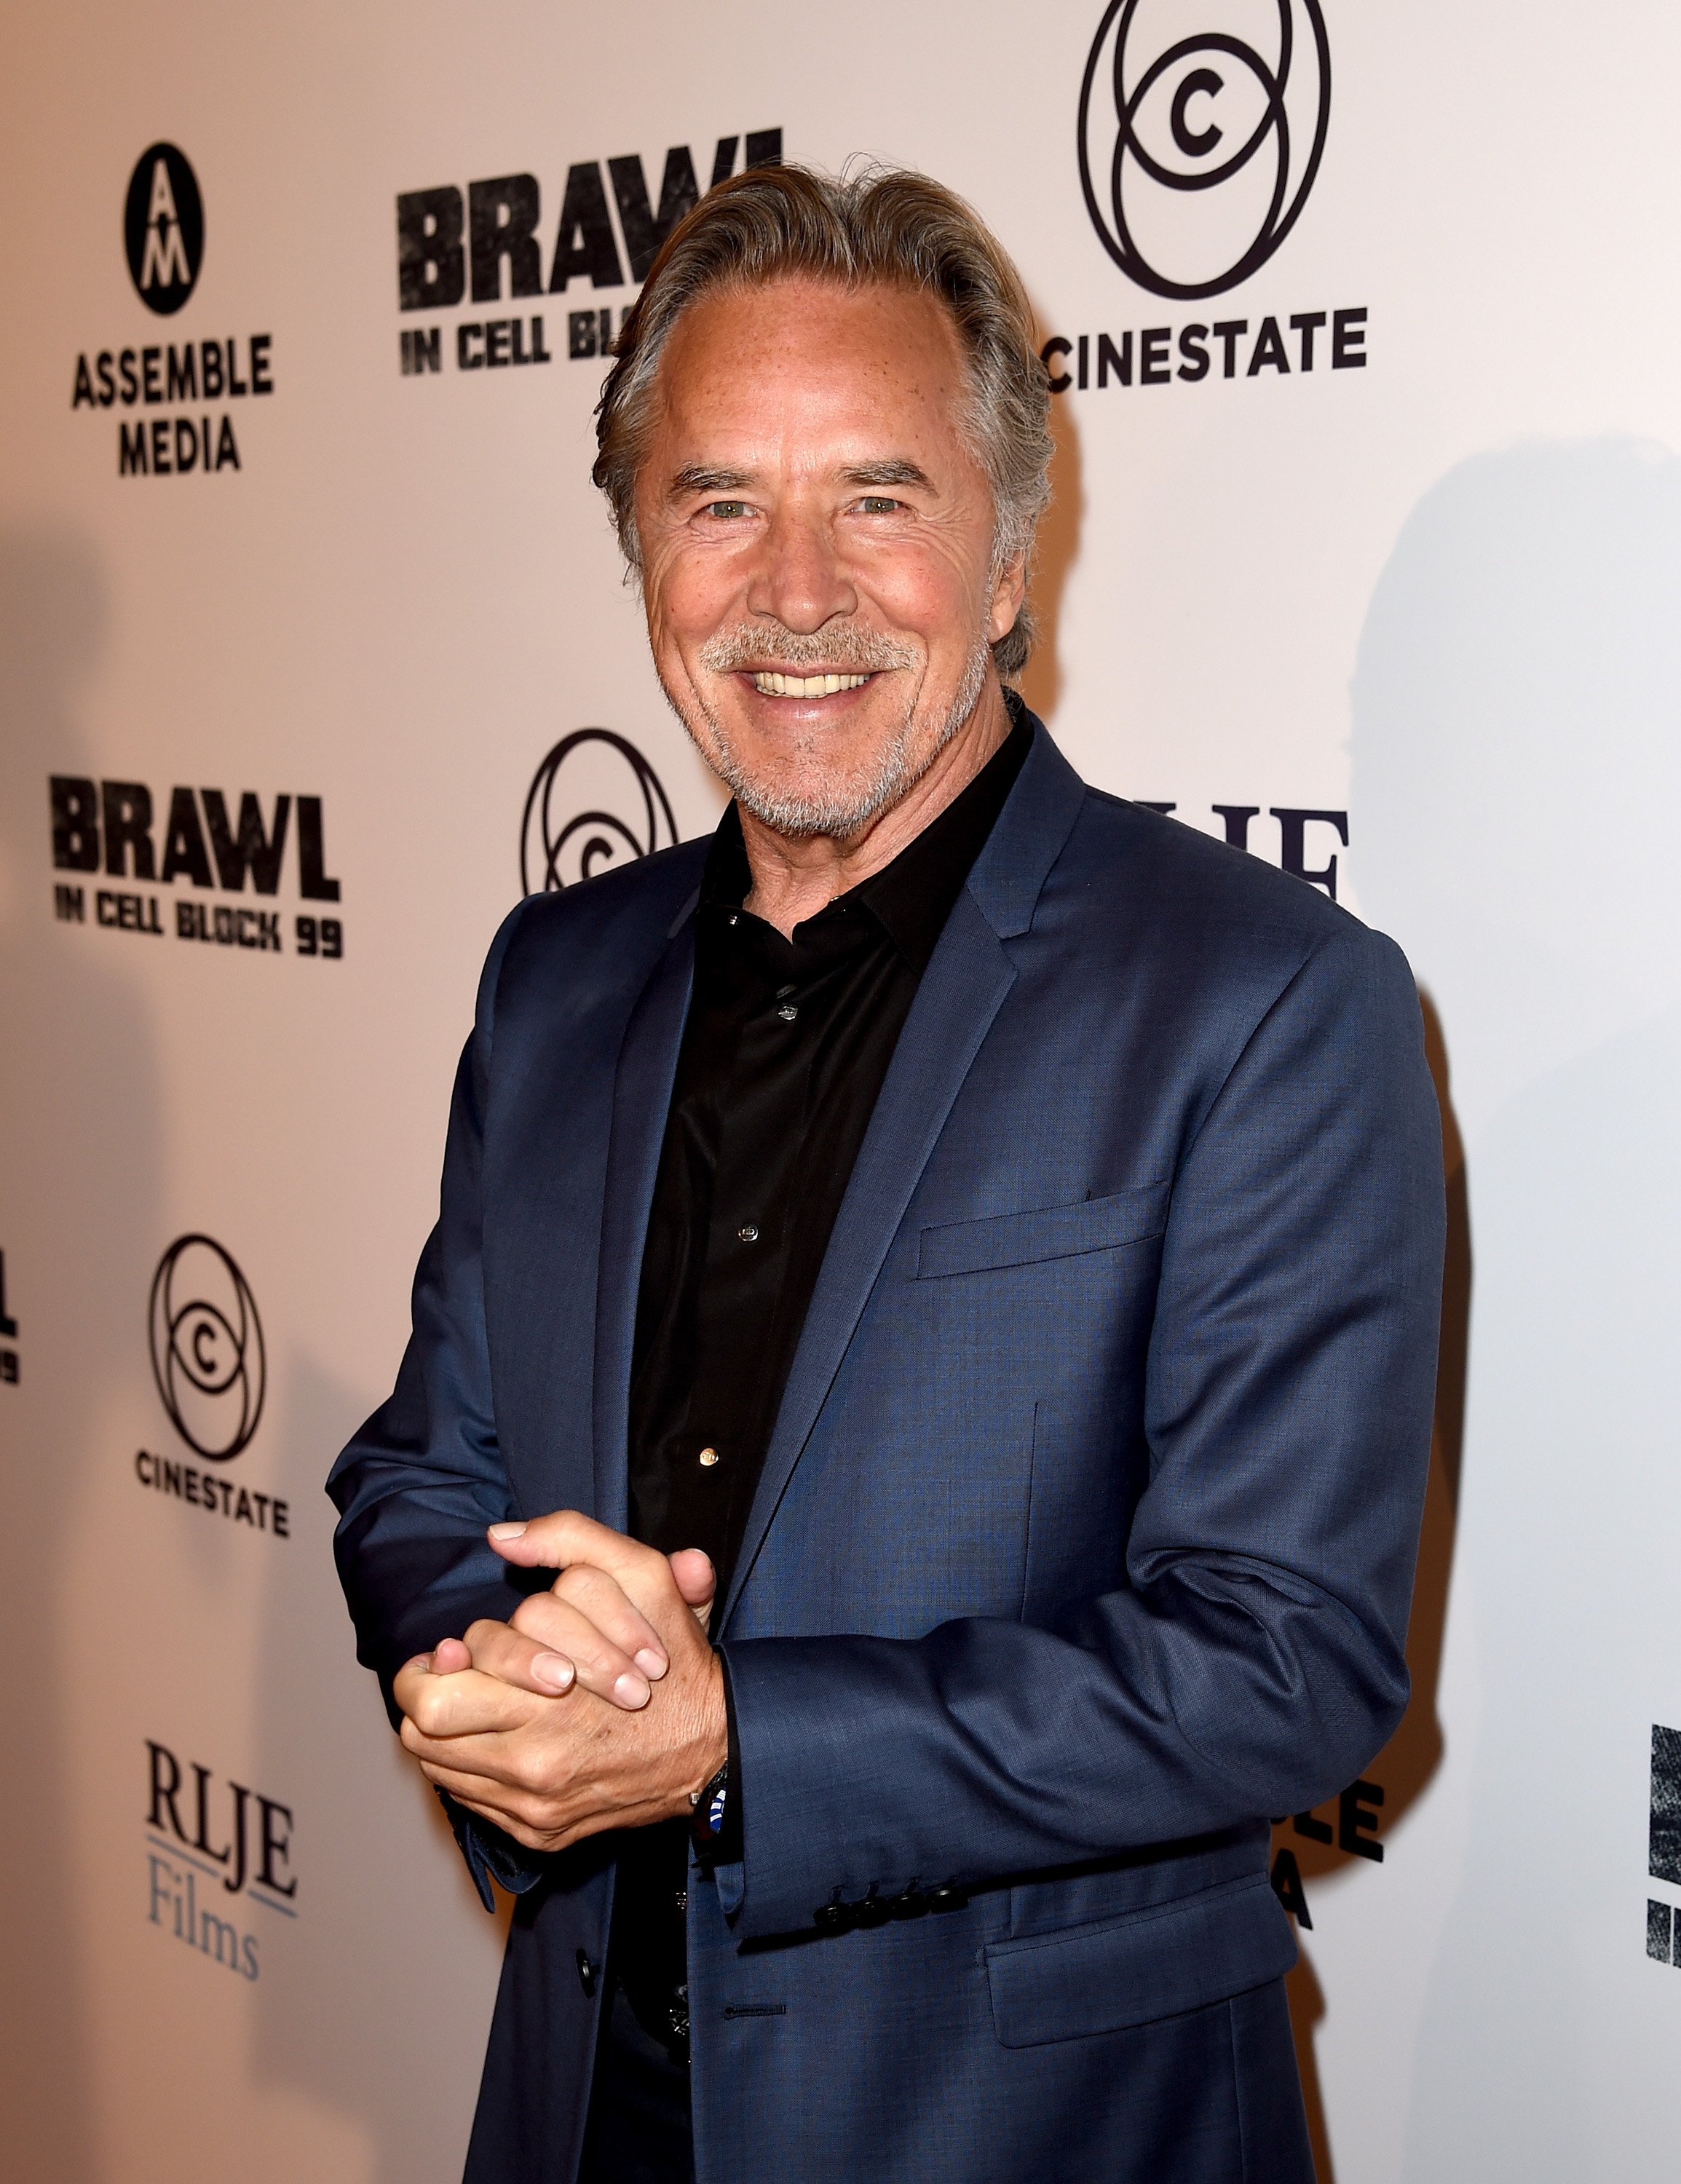 Don Johnson attends the premiere of "Brawl In Cell Block 99" in Los Angeles, California on September 29, 2017 | Photo: Getty Images